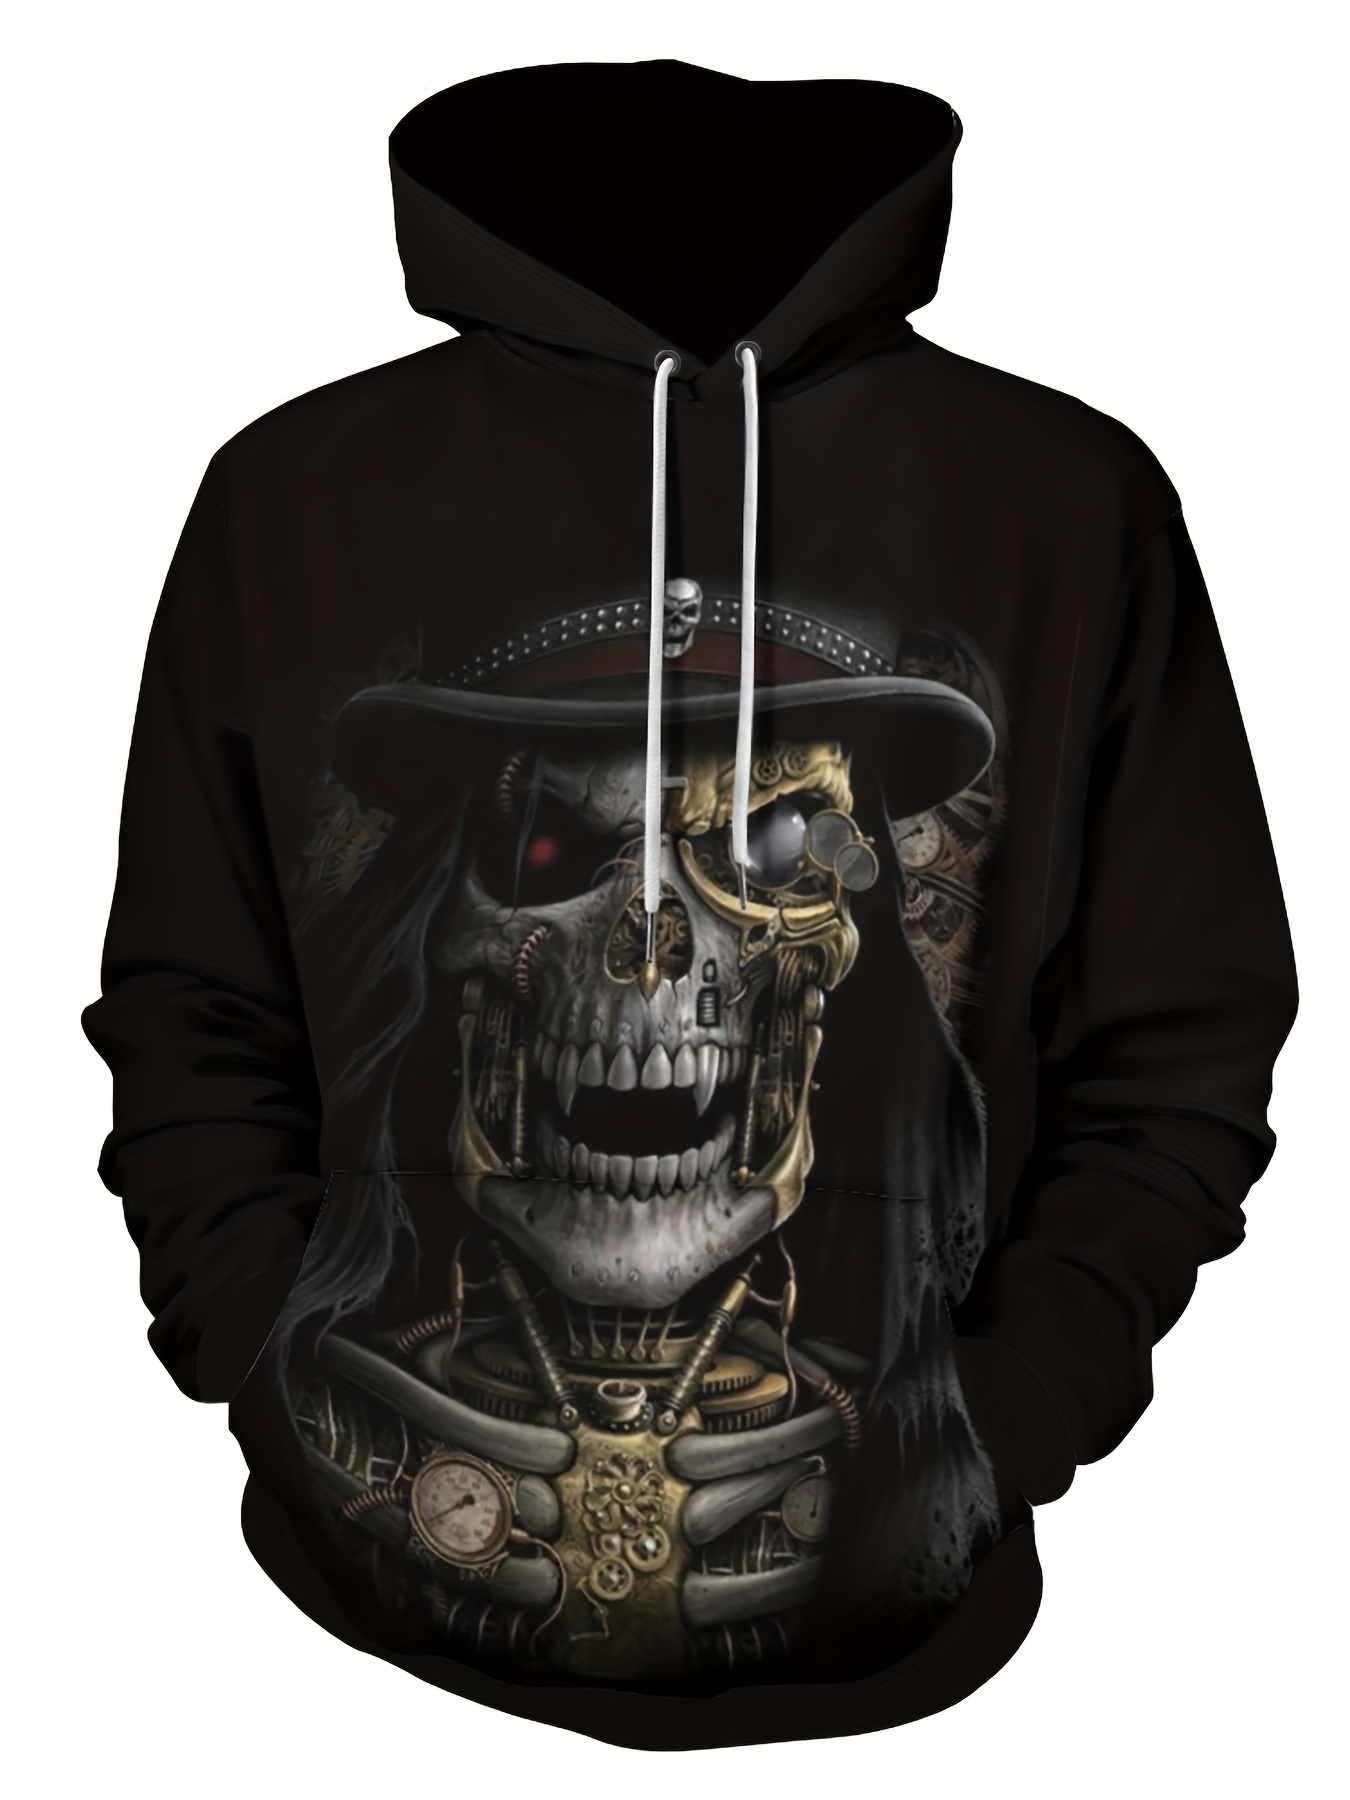 Skull On Fire Print Hoodie, Cool Hoodies For Men, Men's Casual Graphic  Design Pullover Hooded Sweatshirt With Kangaroo Pocket Streetwear For  Winter Fa